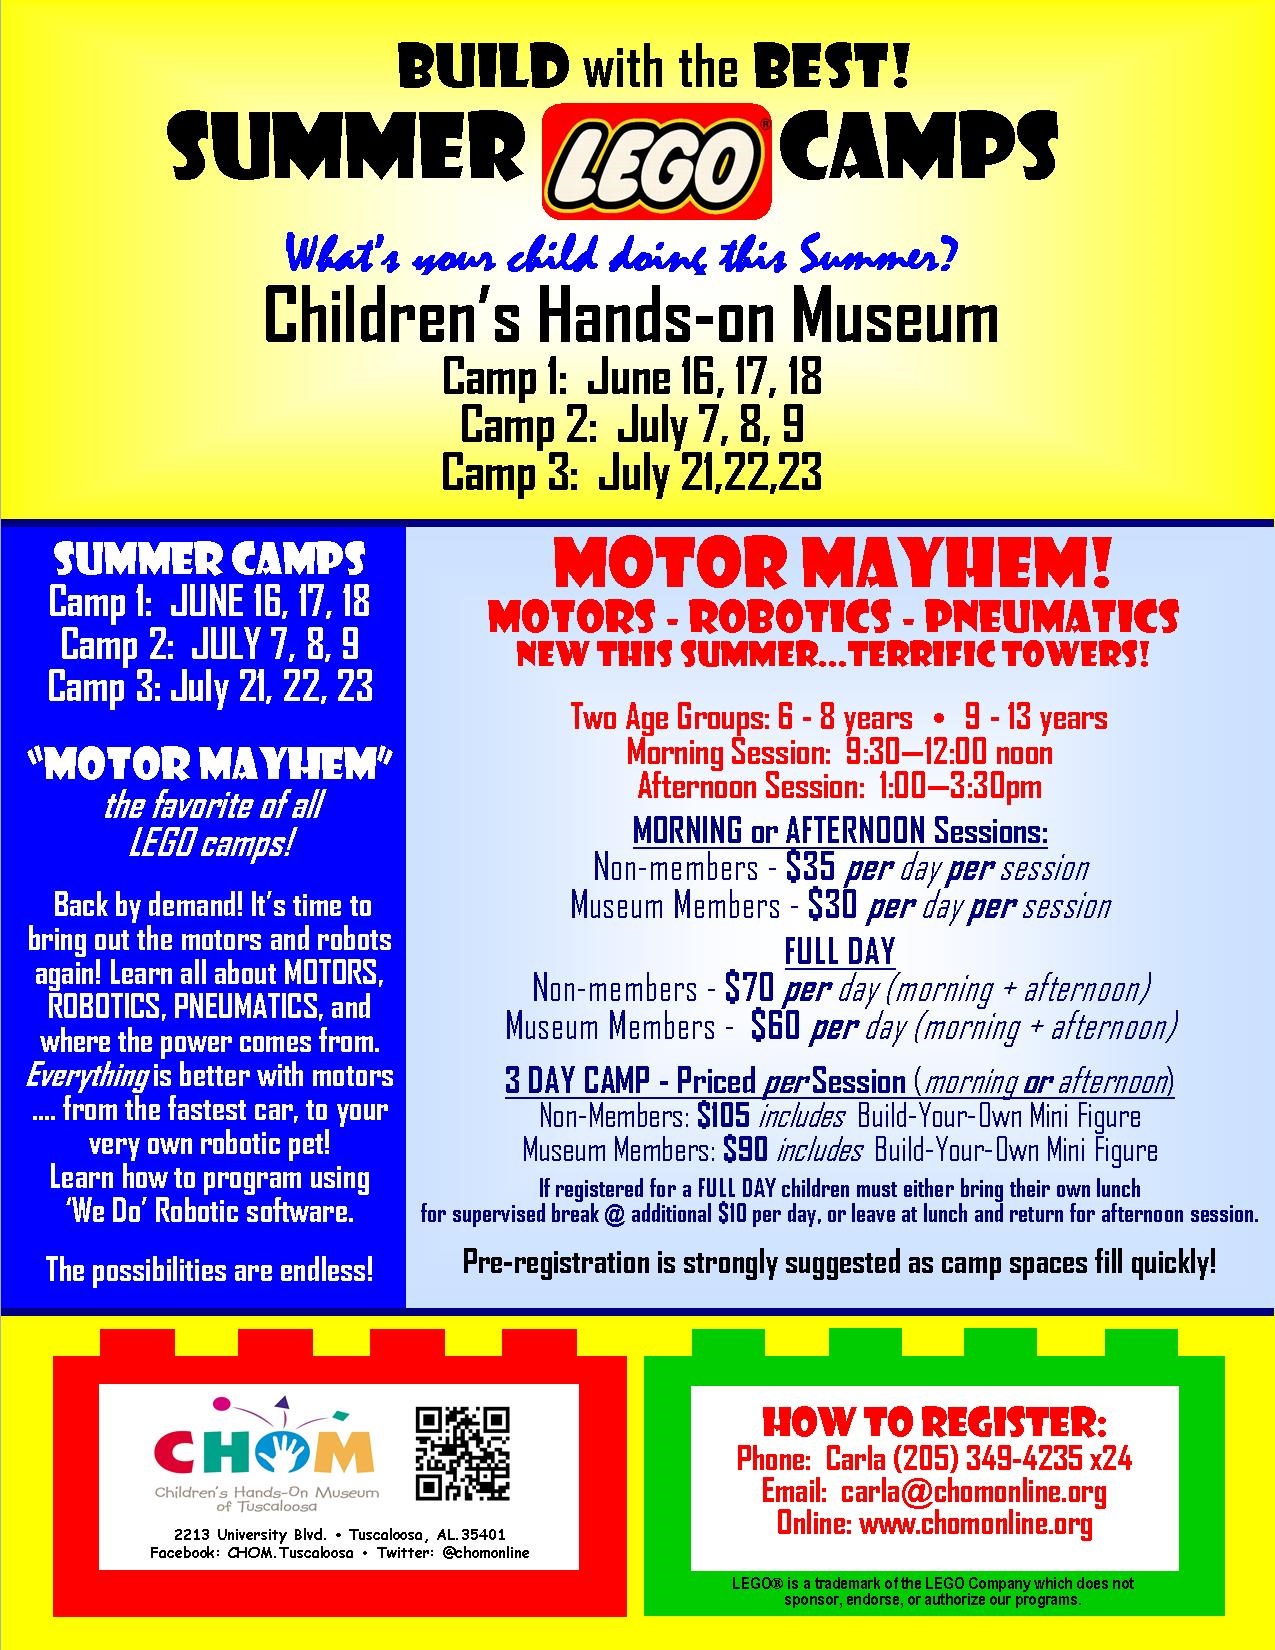 Summer Lego Camps at CHOM!